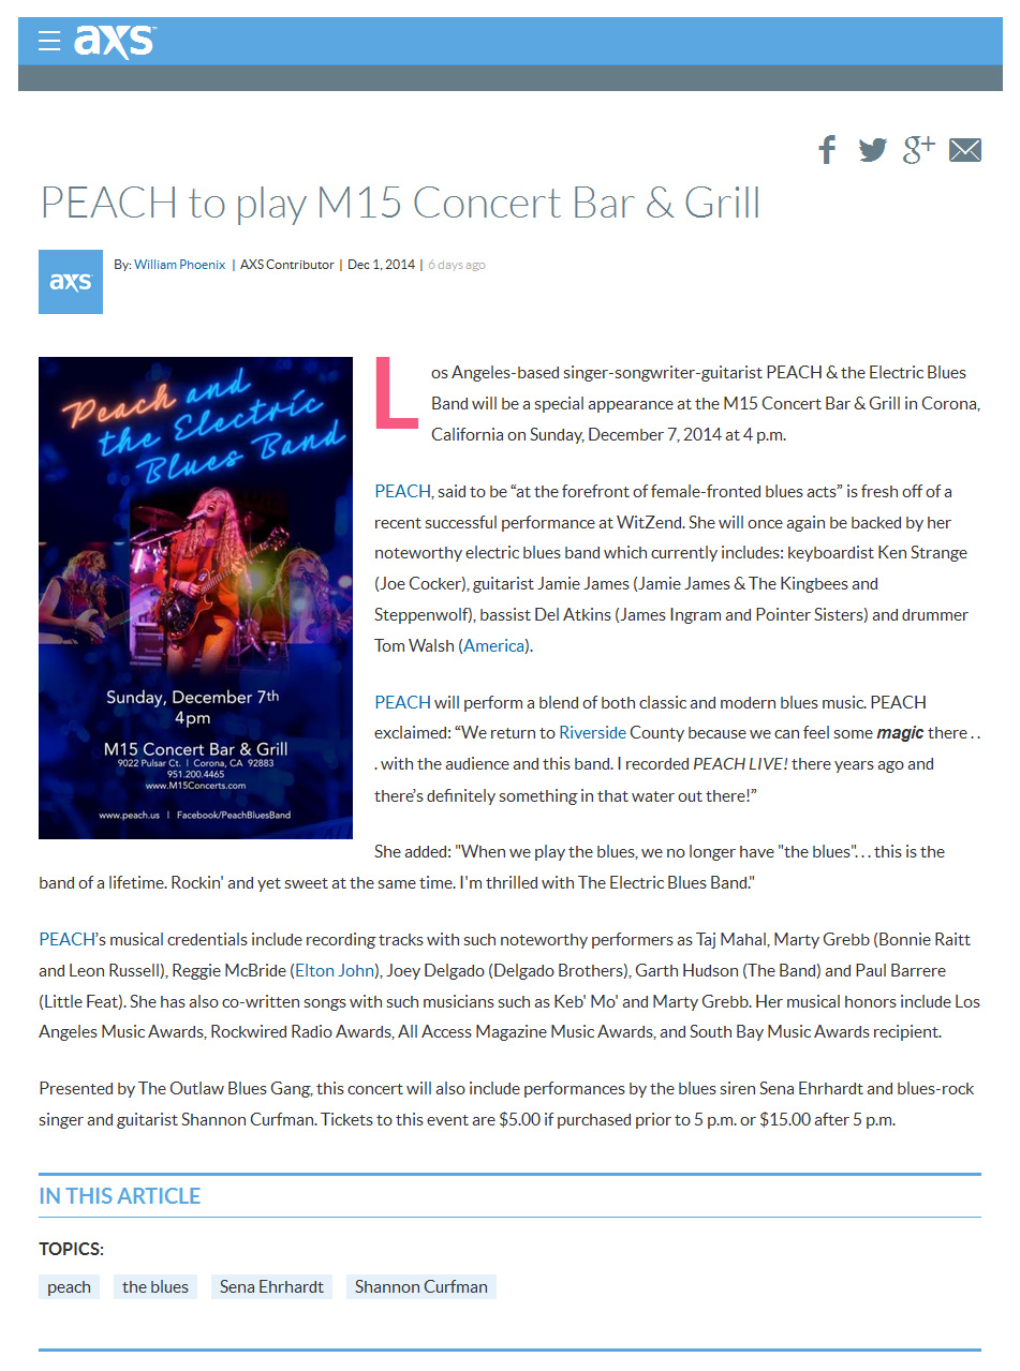 PEACH to Play M15 Concert Bar & Grill